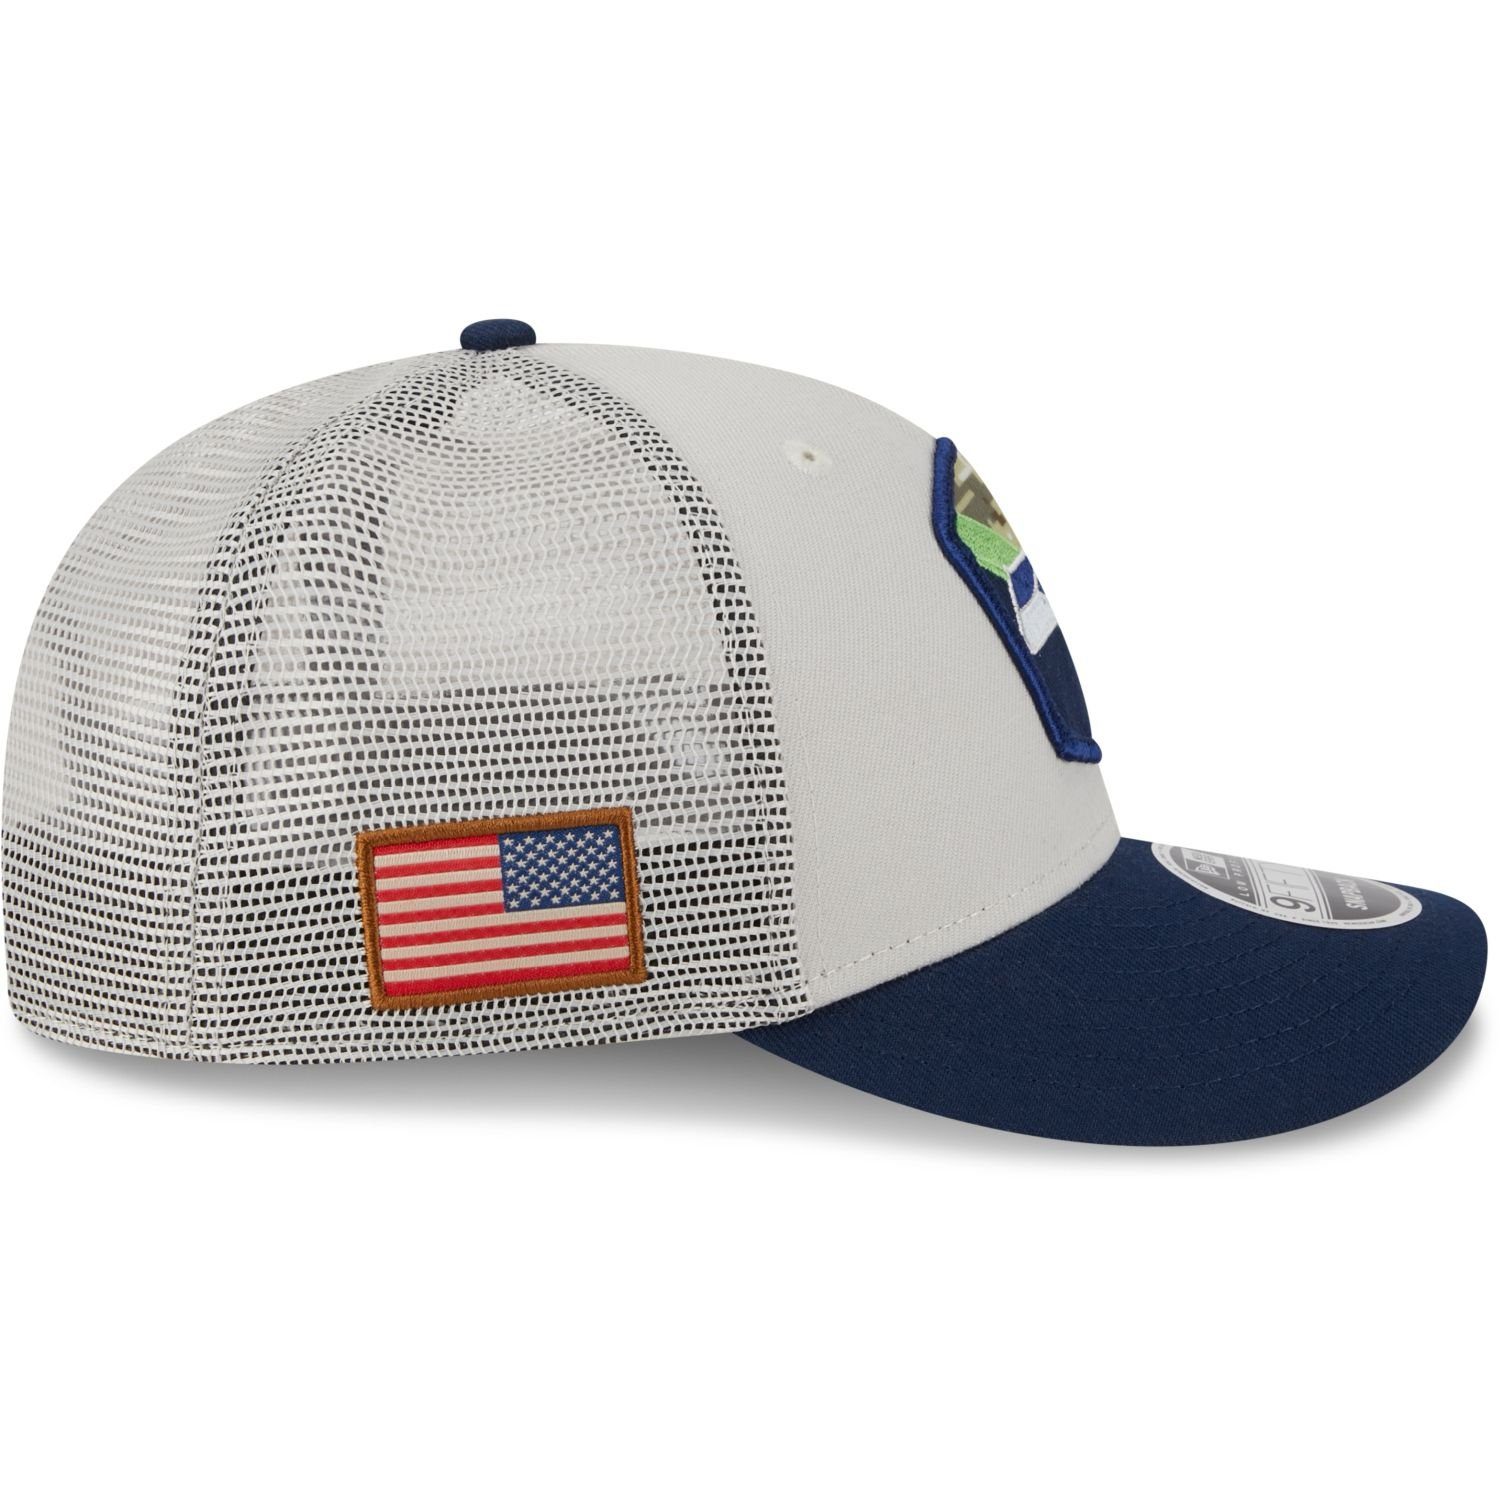 New Salute Seahawks Low Snapback to Profile Snap Seattle 9Fifty Service Cap NFL Era